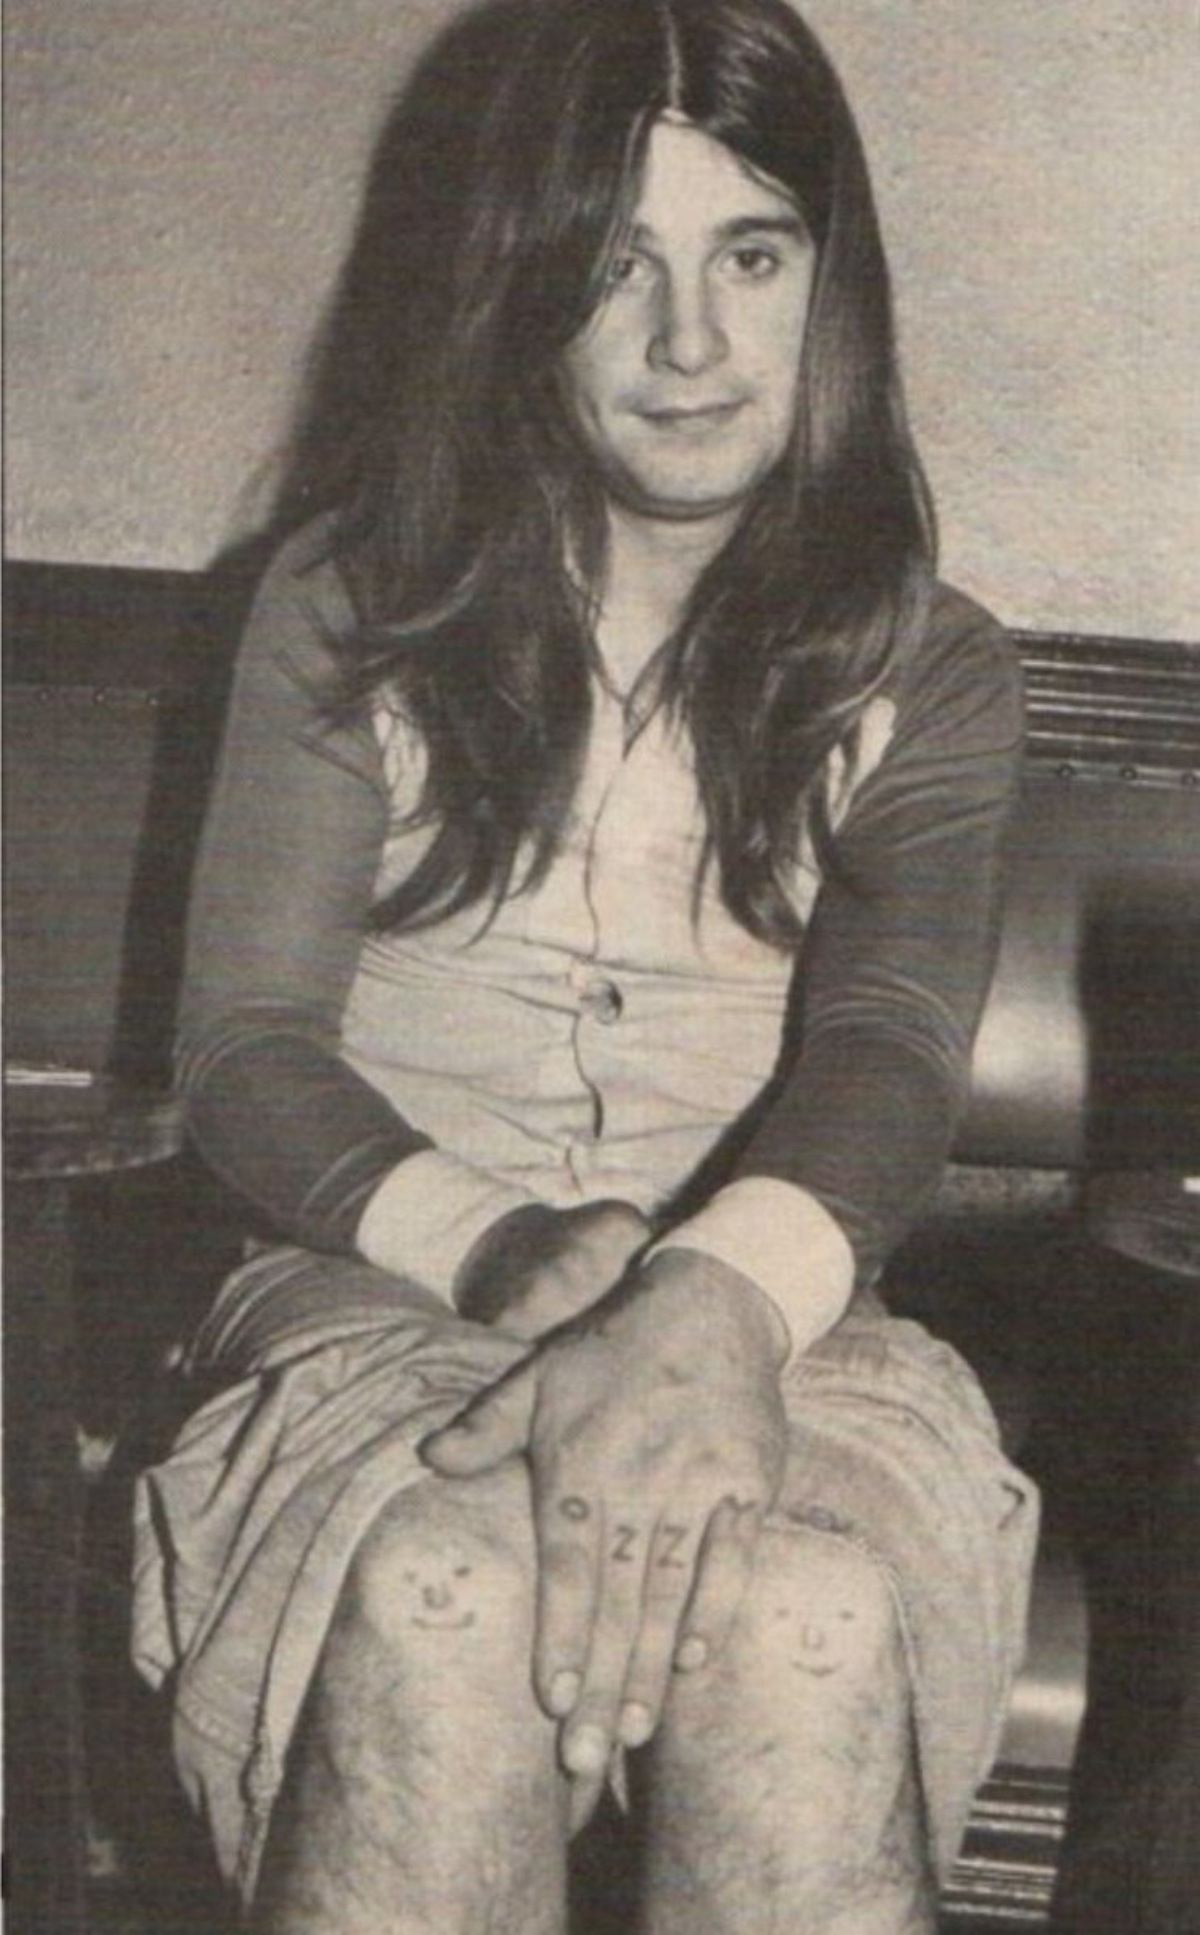 Ozzy Osbourne as a young man